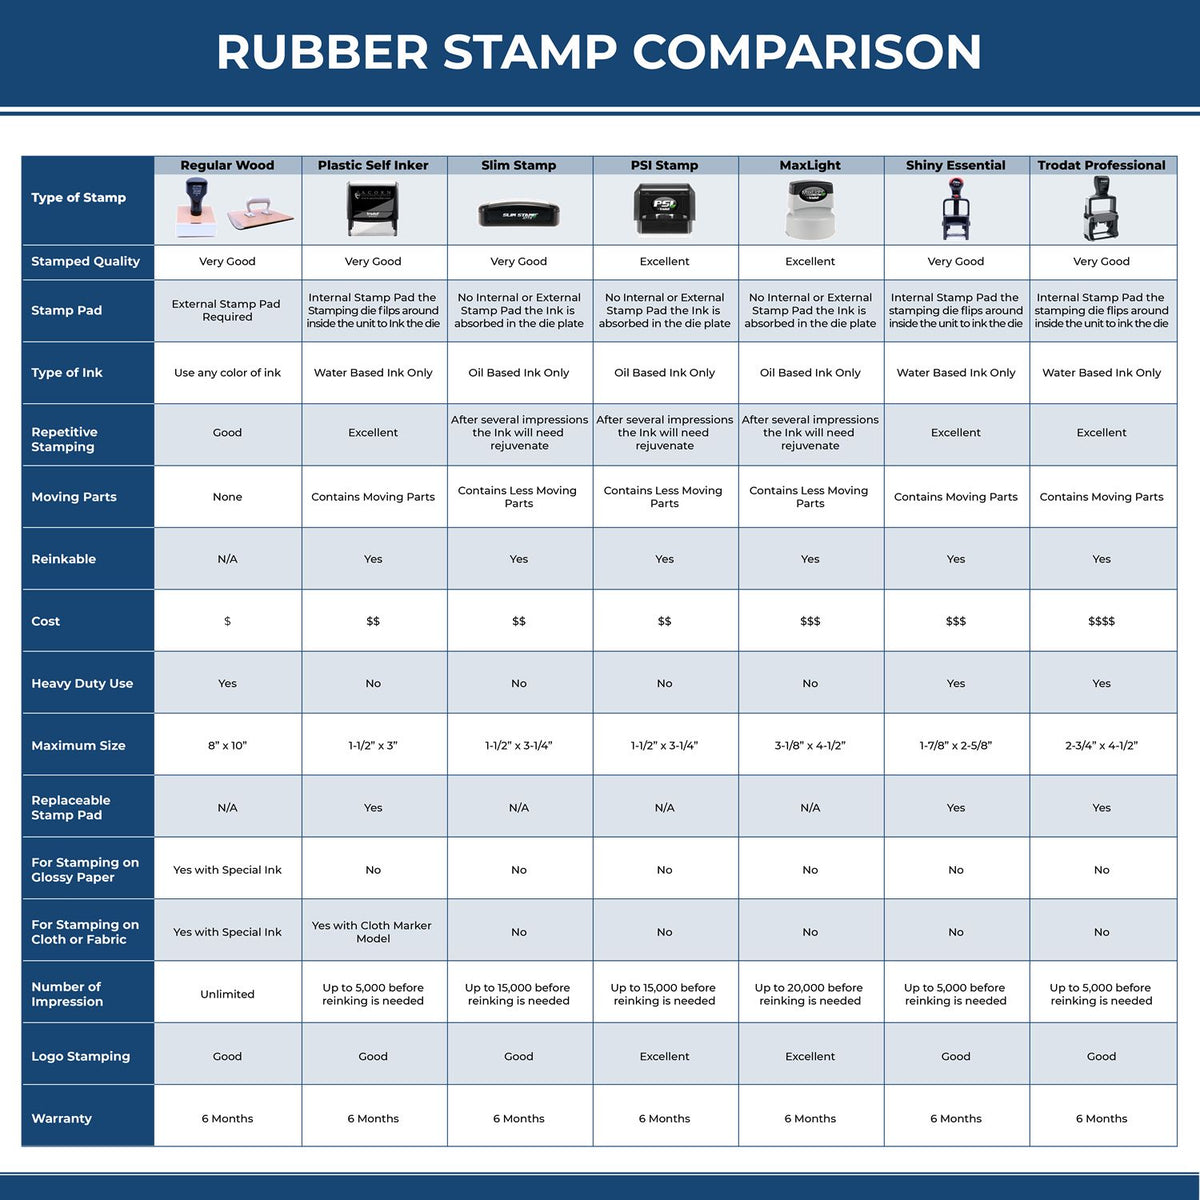 Large Self-Inking Telehealth Stamp 4979S Rubber Stamp Comparison